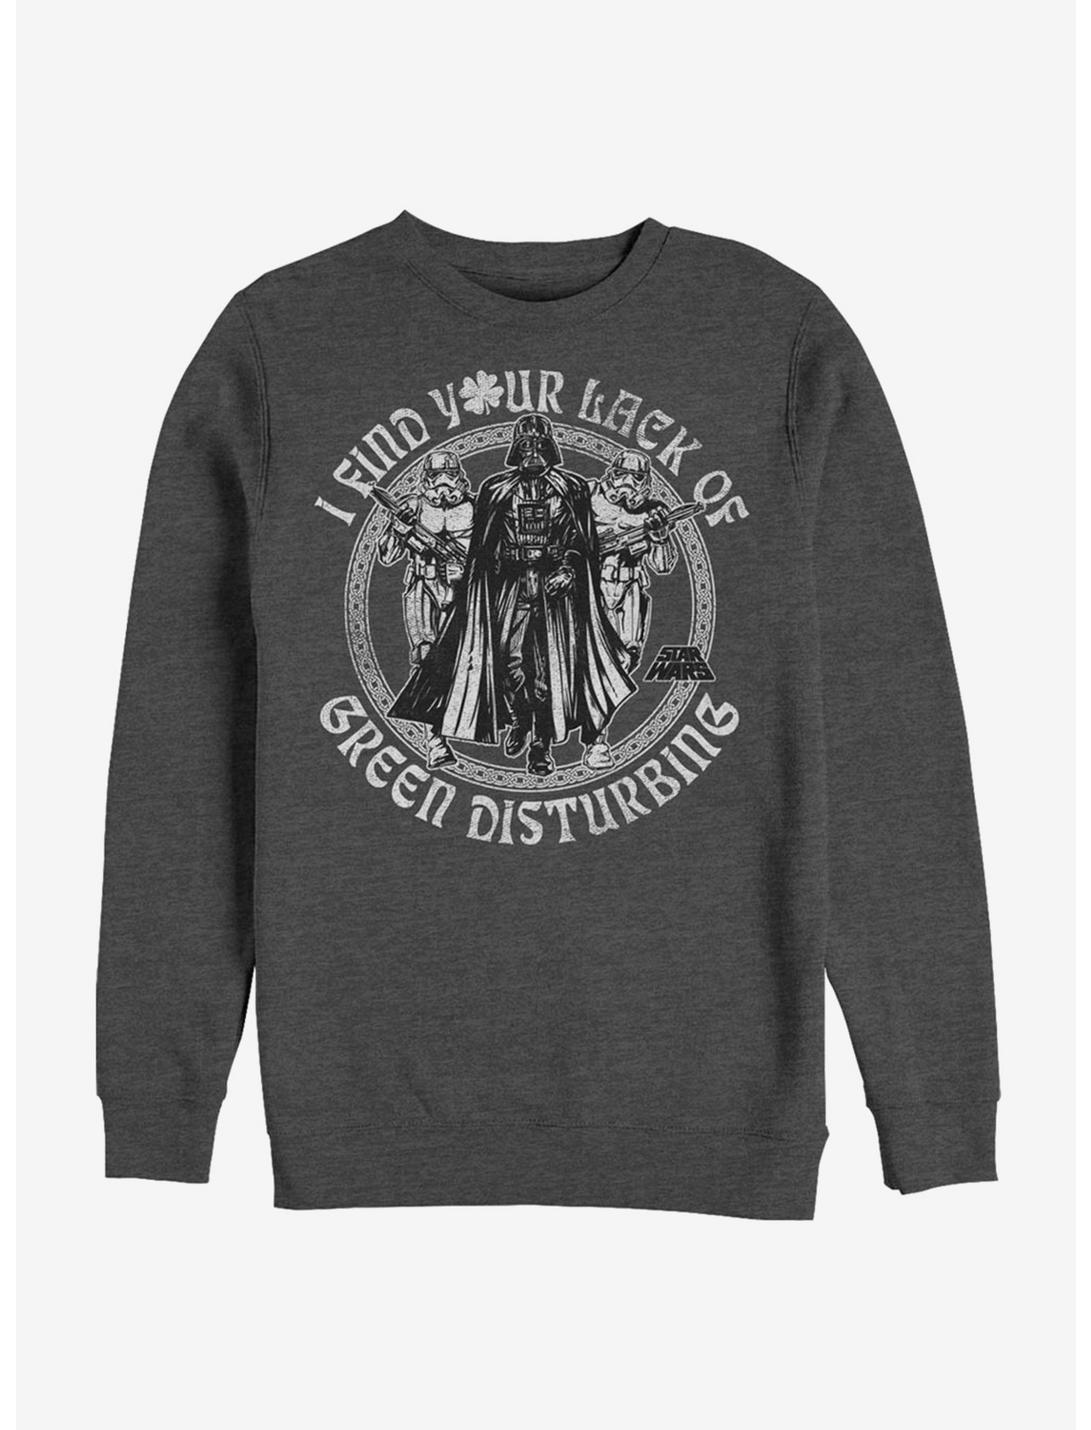 Star Wars Out Of Luck  Sweatshirt, CHAR HTR, hi-res